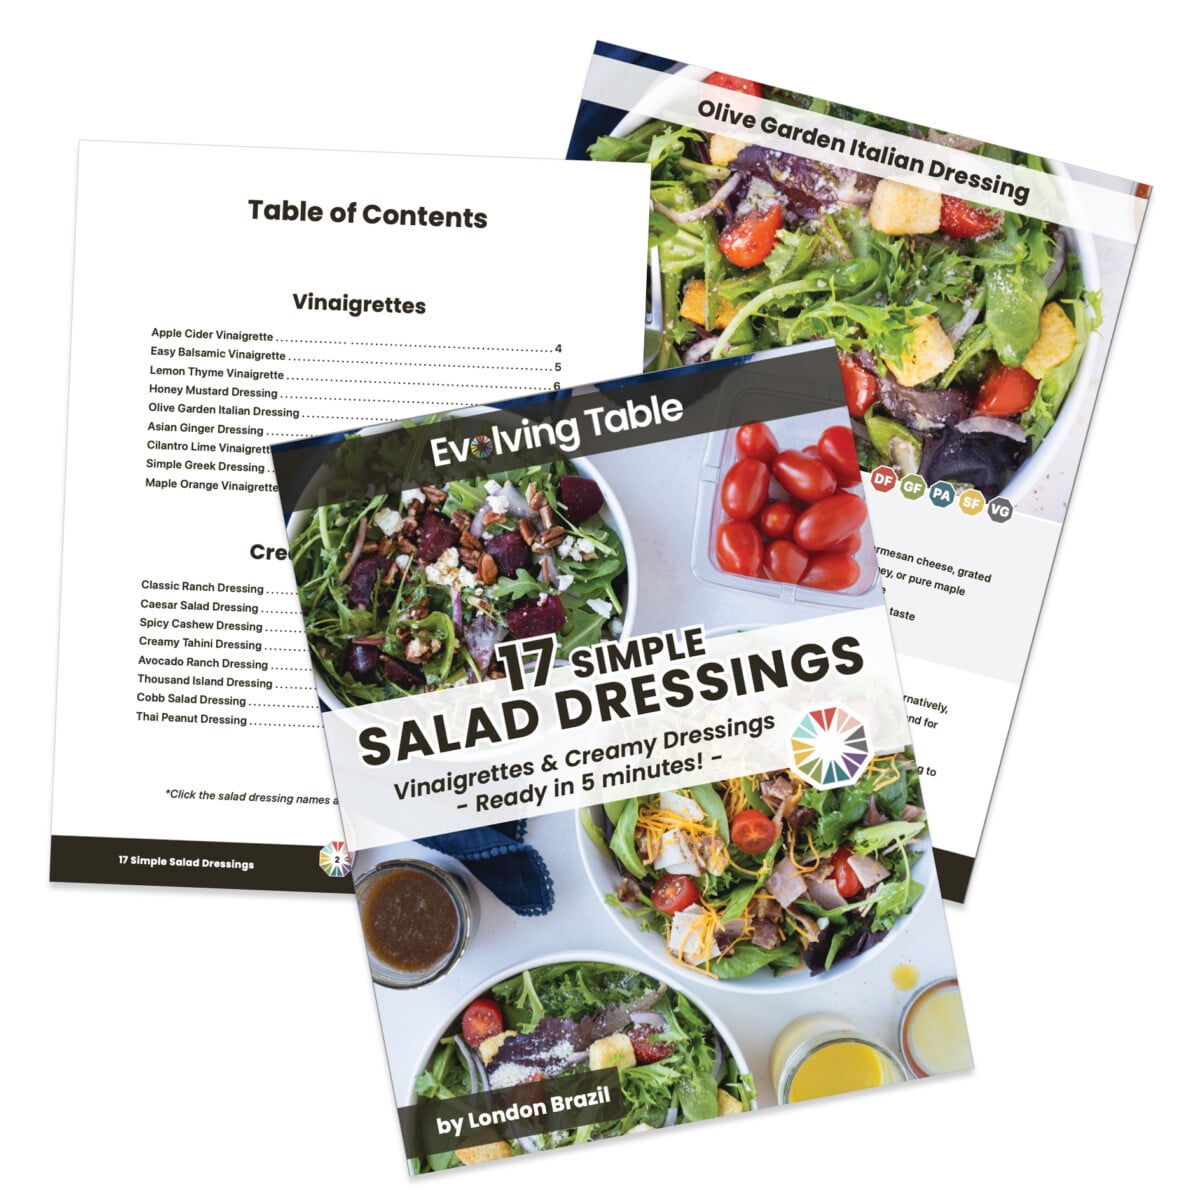 A cover, table of contents, and recipe page for the 17 healthy salad dressings e-book.